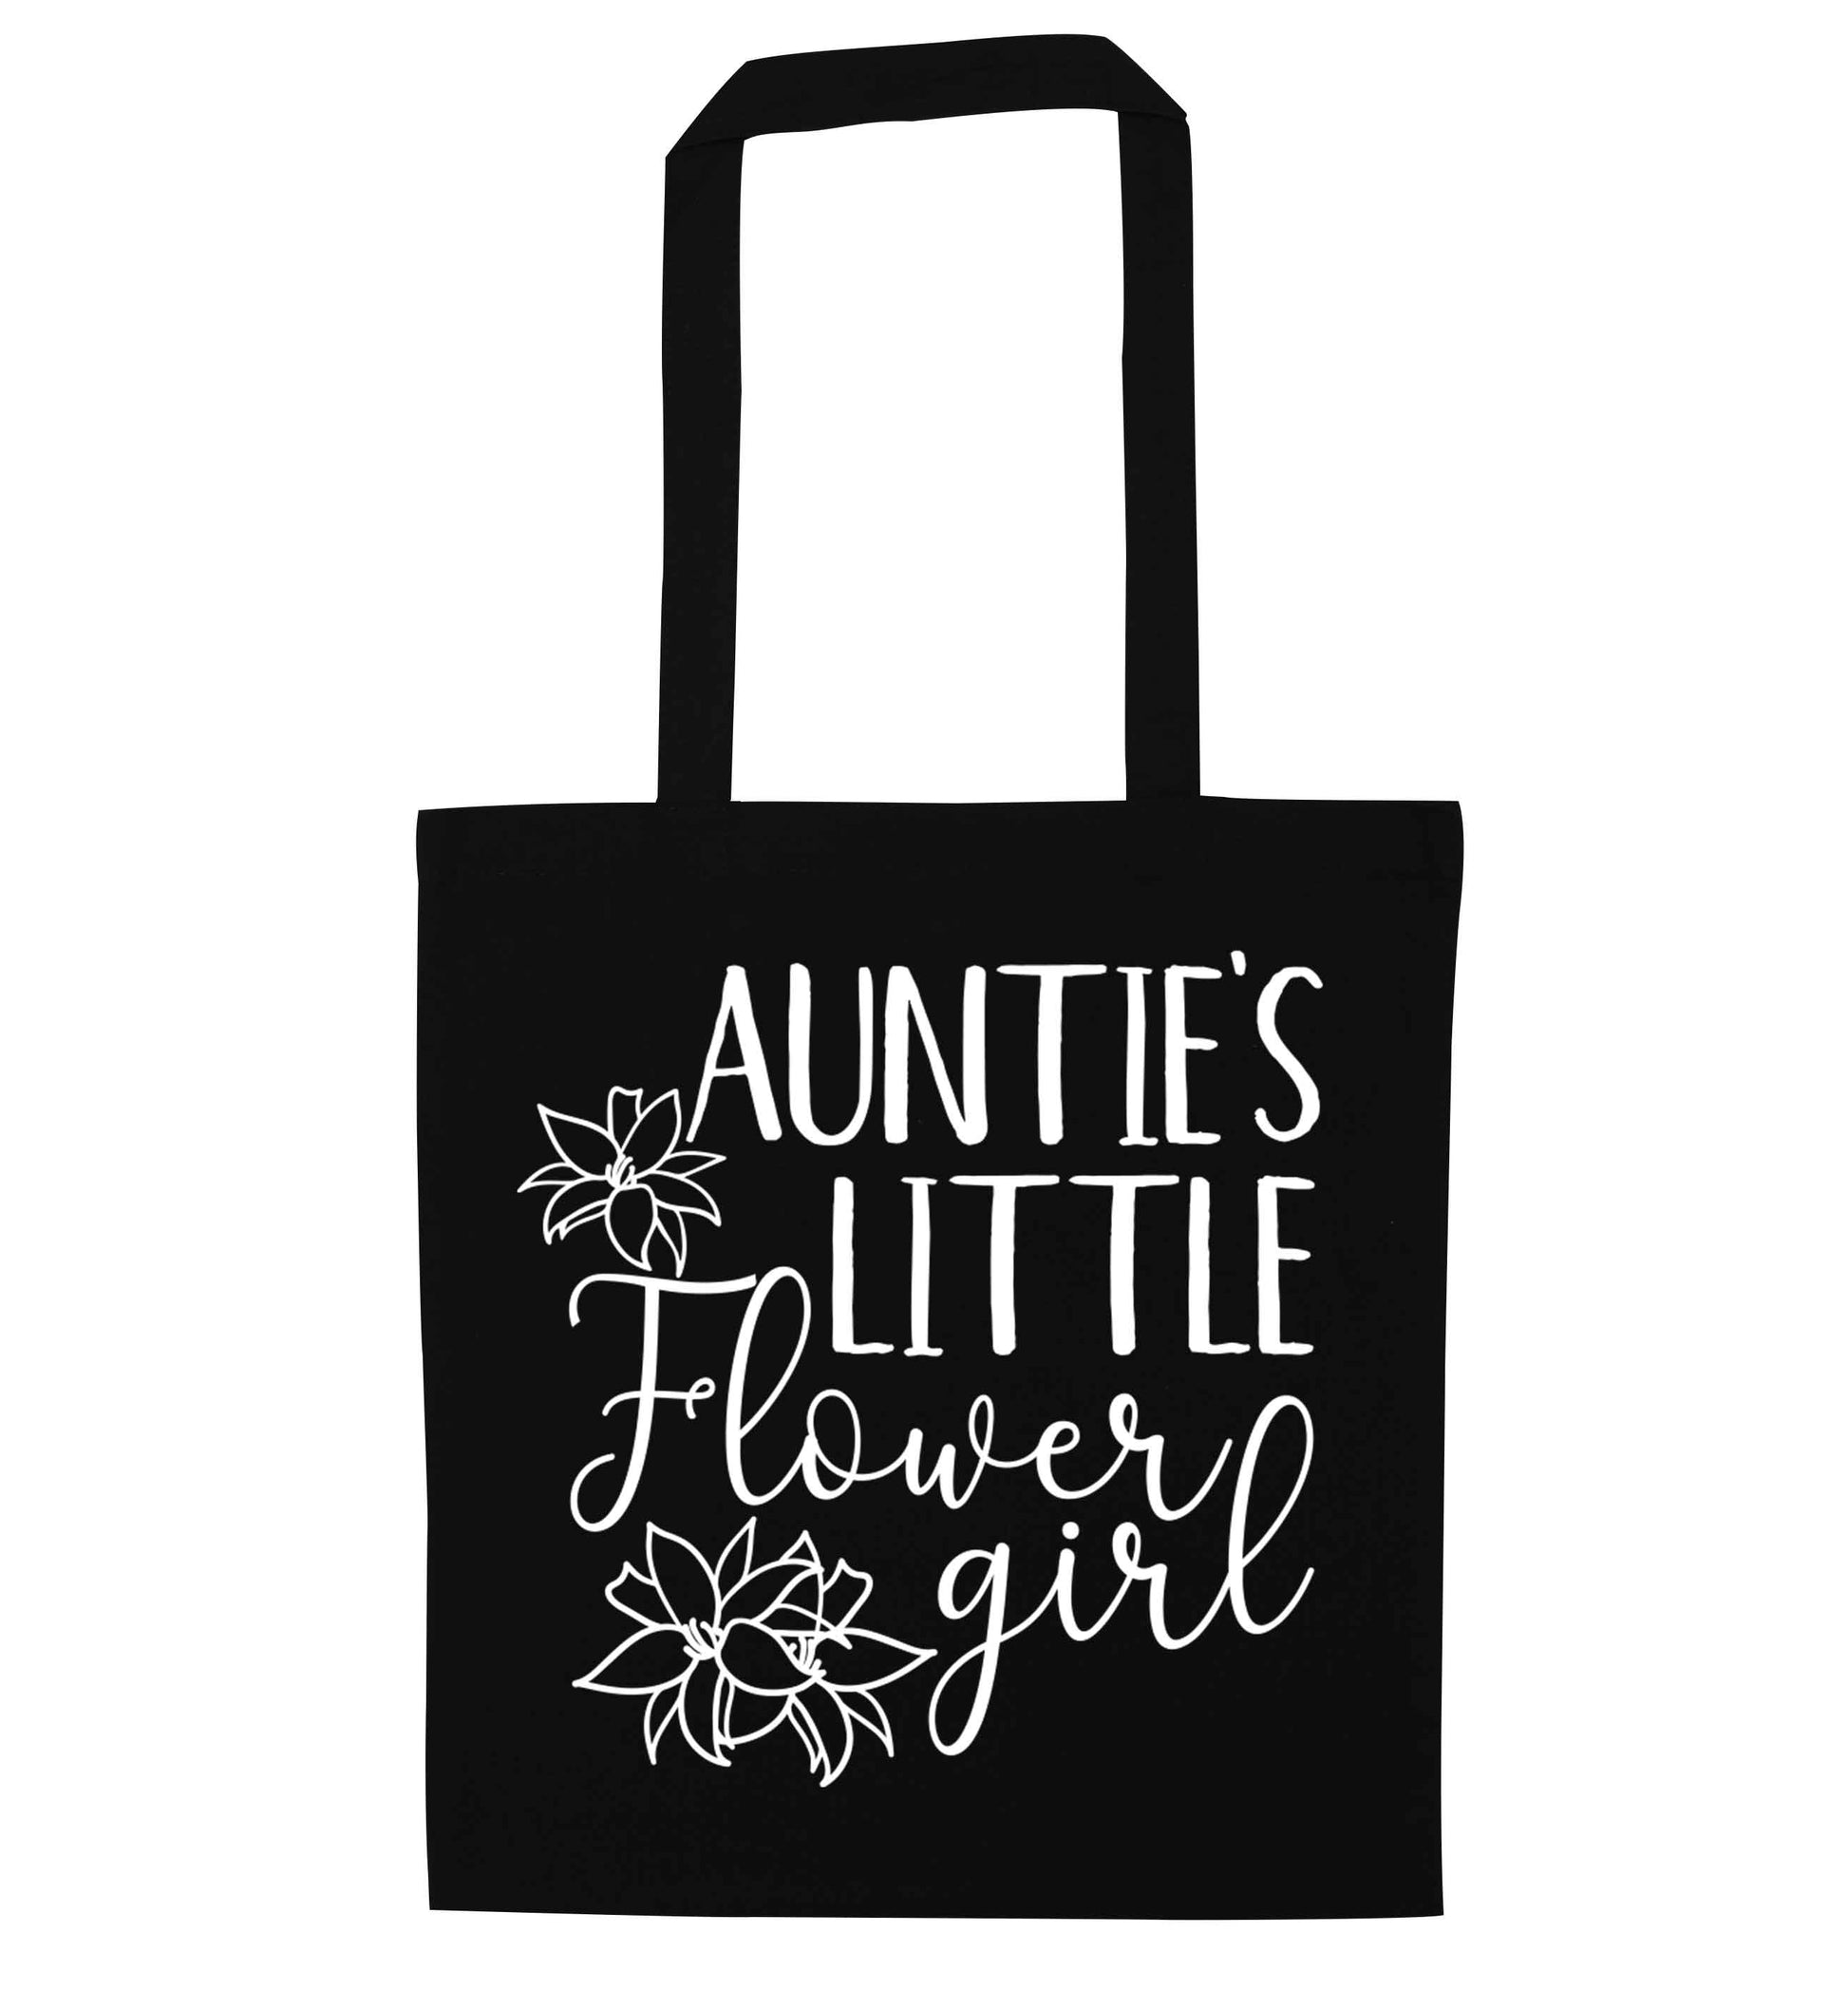 Perfect wedding guest favours or hen party gifts! Personalised bridal floral wreath designs, any name, any role! black tote bag